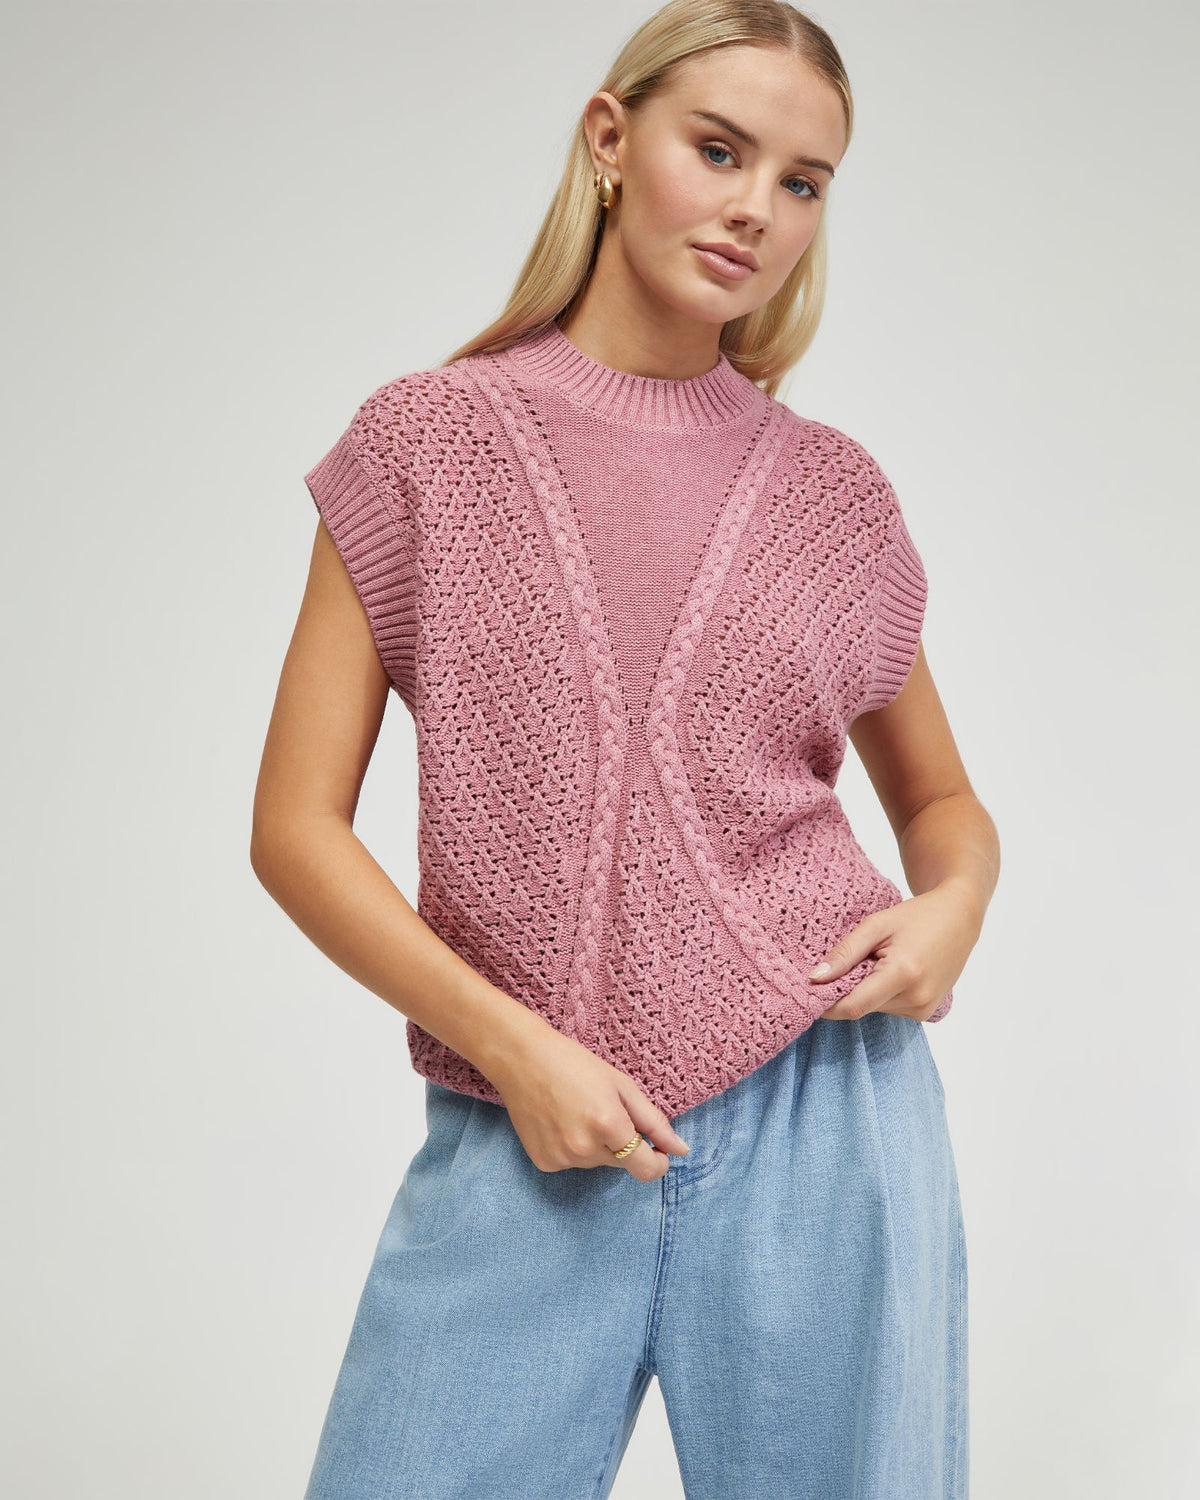 MONICA CABLE KNIT VEST - AVAILABLE ~ 1-2 weeks WOMENS KNITWEAR